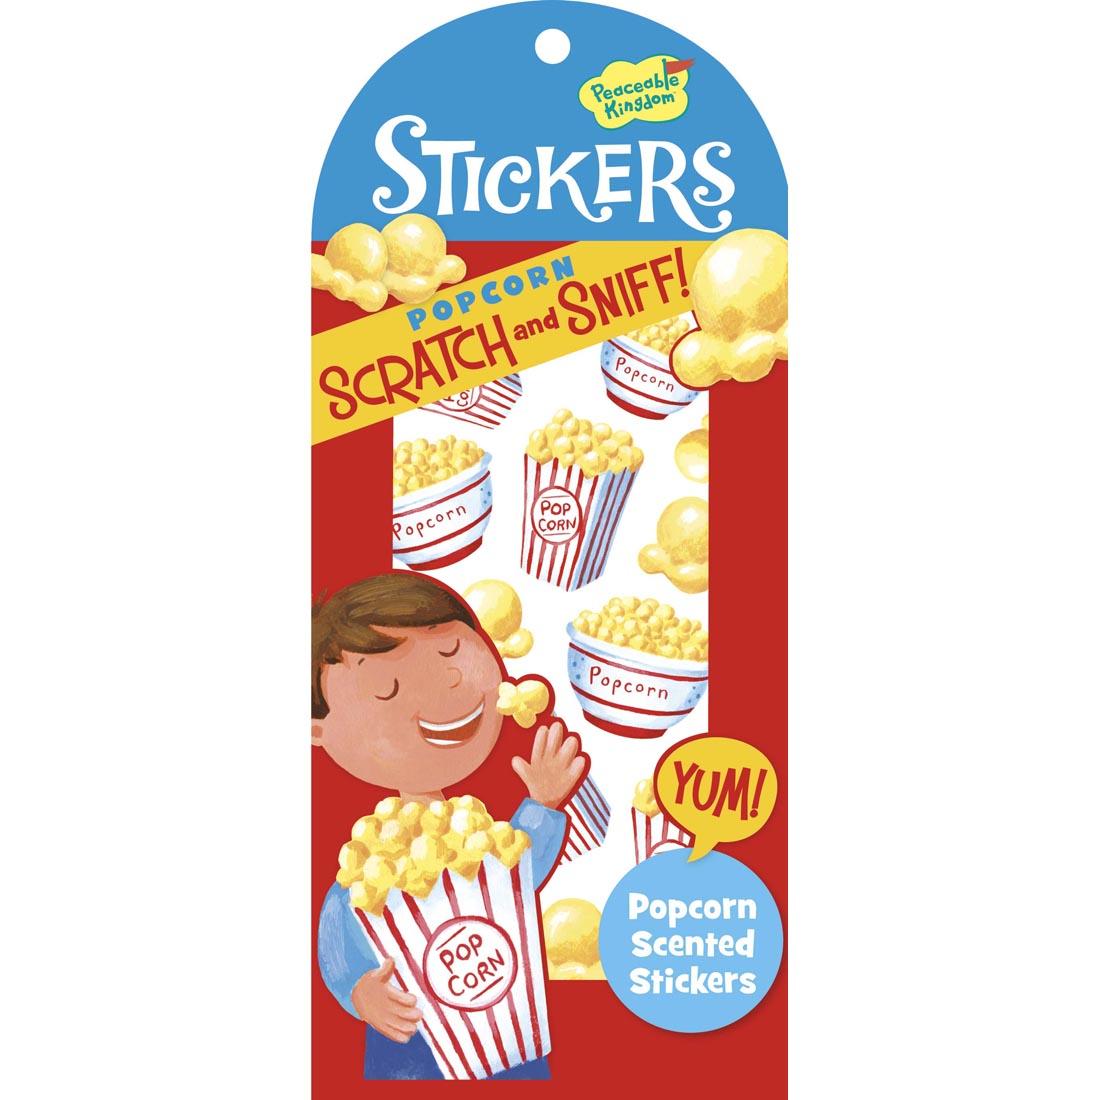 Popcorn Scratch and Sniff Stickers by Peaceable Kingdom